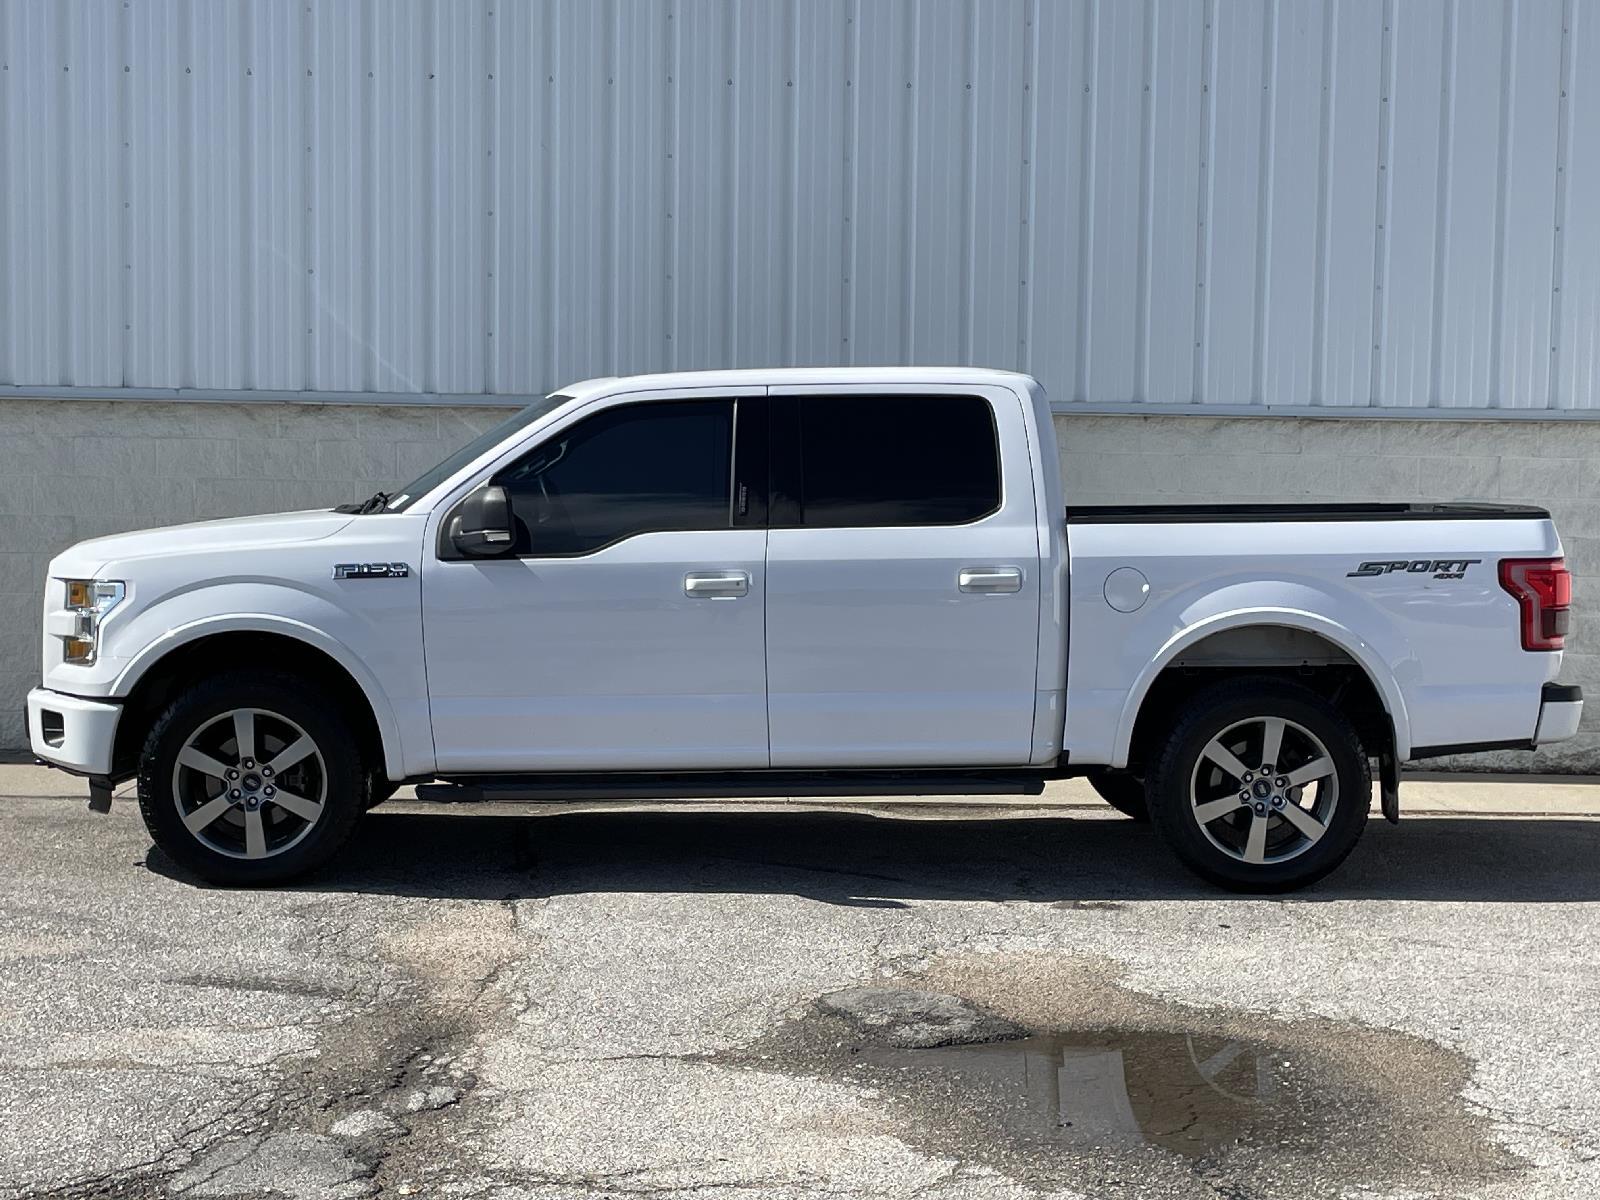 Used 2016 Ford F-150 XLT Crew Cab Truck for sale in Lincoln NE